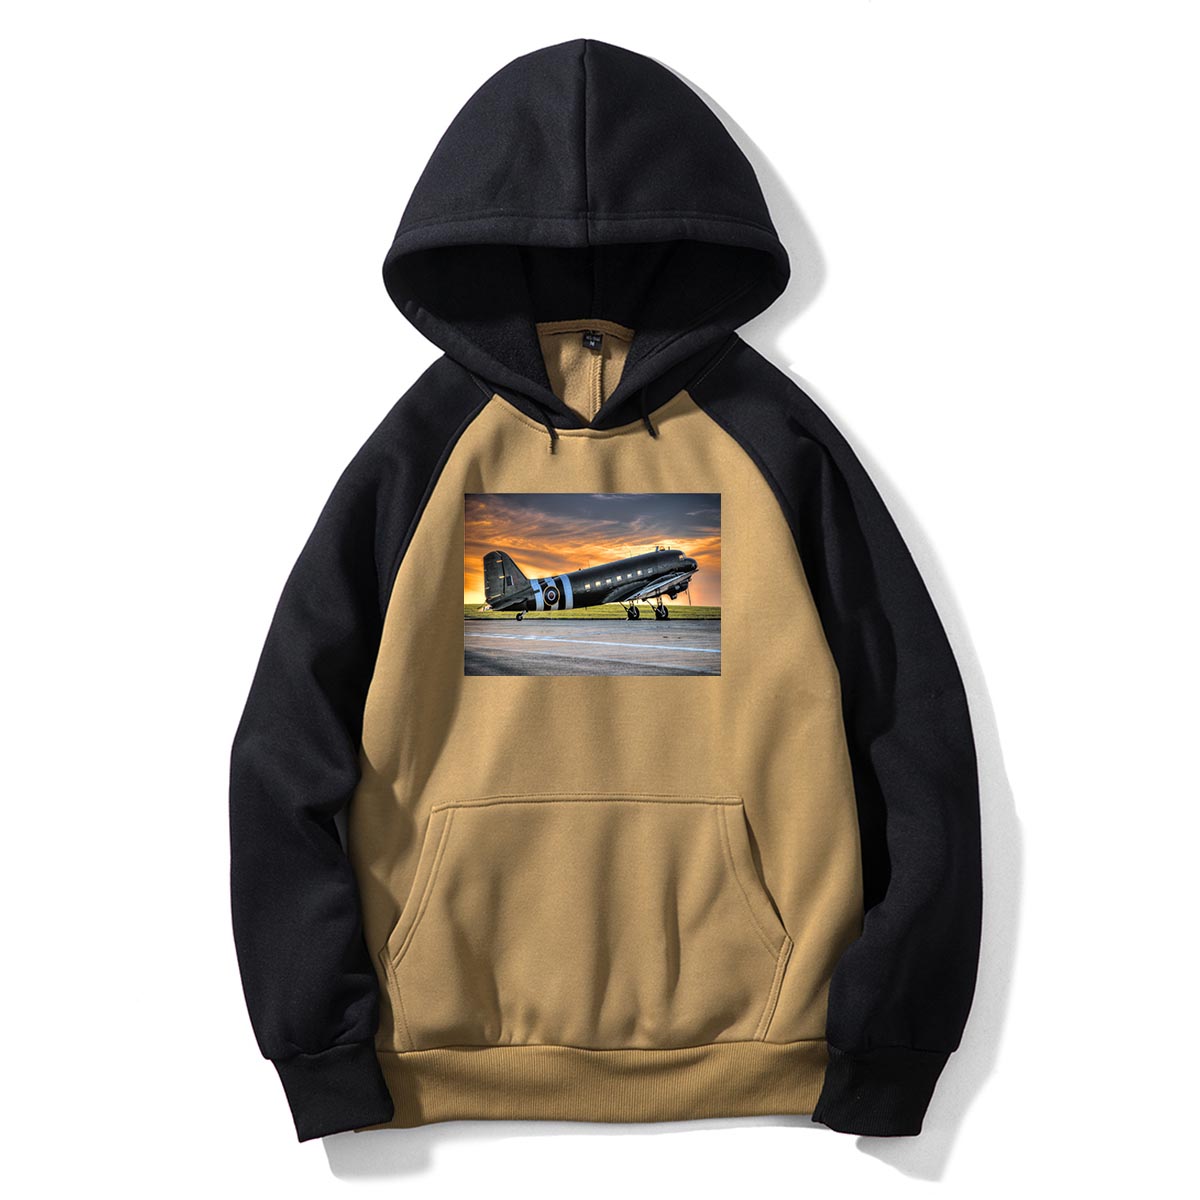 Old Airplane Parked During Sunset Designed Colourful Hoodies